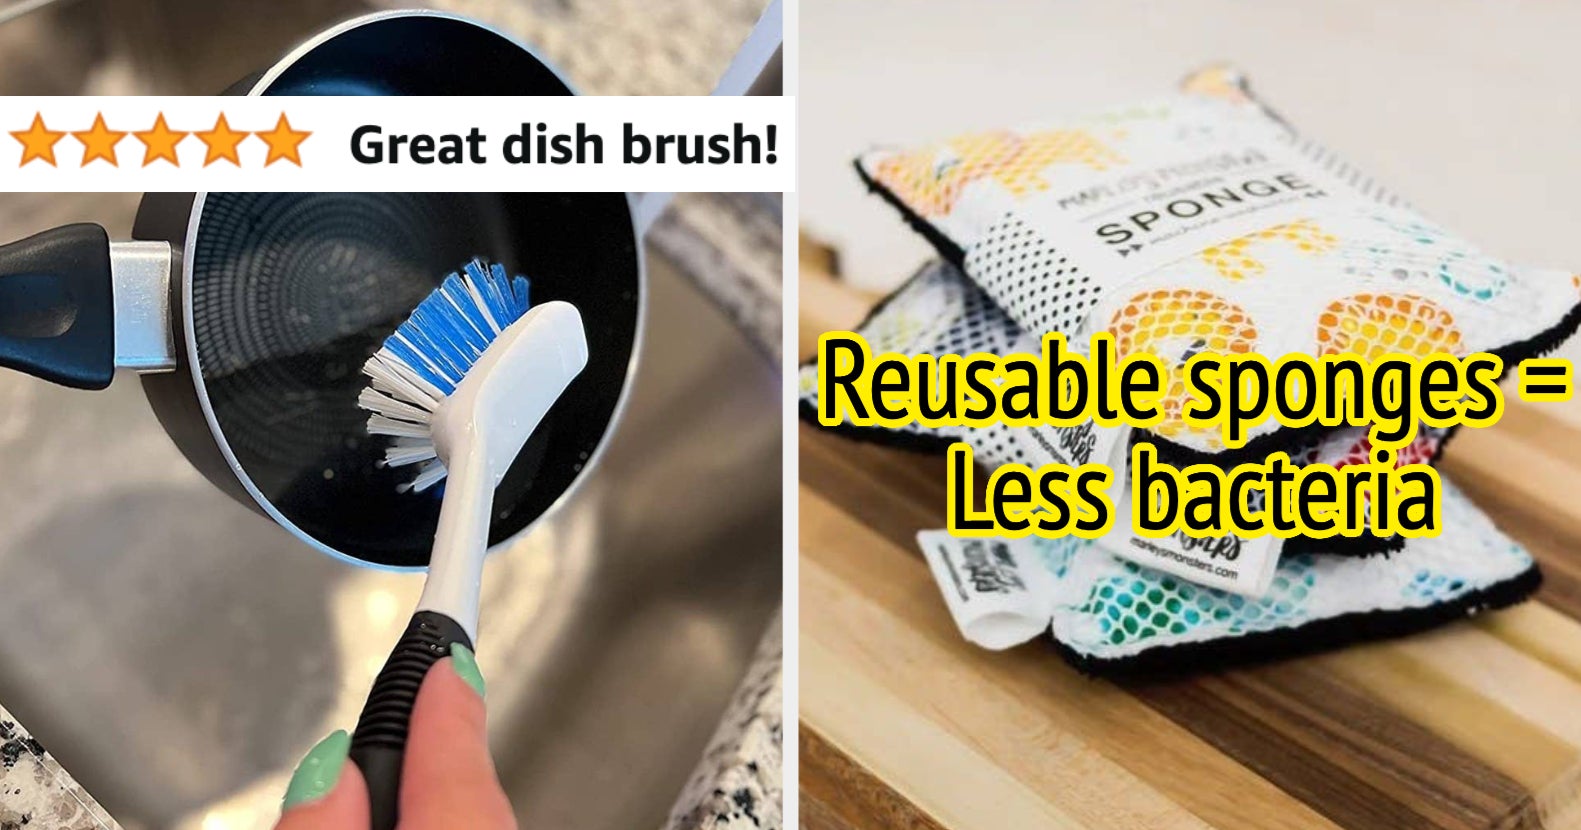 Dish washing products: 17 gadgets to improve your least favorite